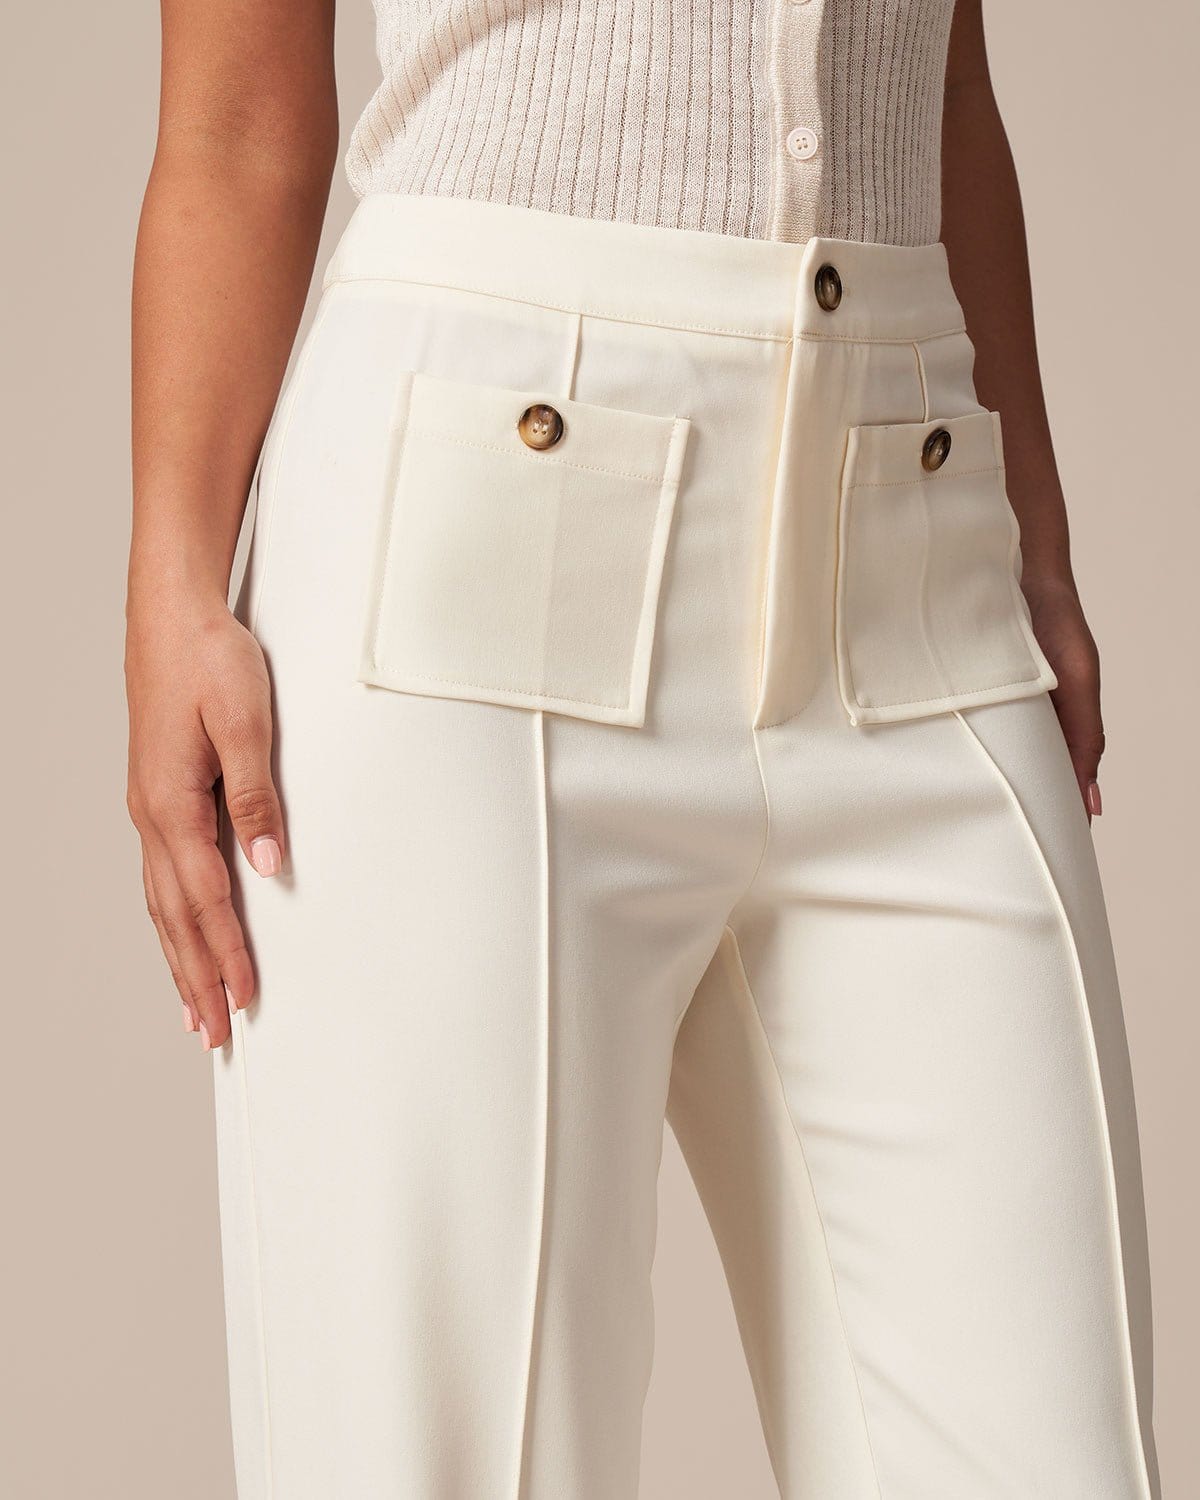 The White High Waisted Button Straight Pants - High Waisted Straight Leg  Pockets Work Pants - White - Bottoms